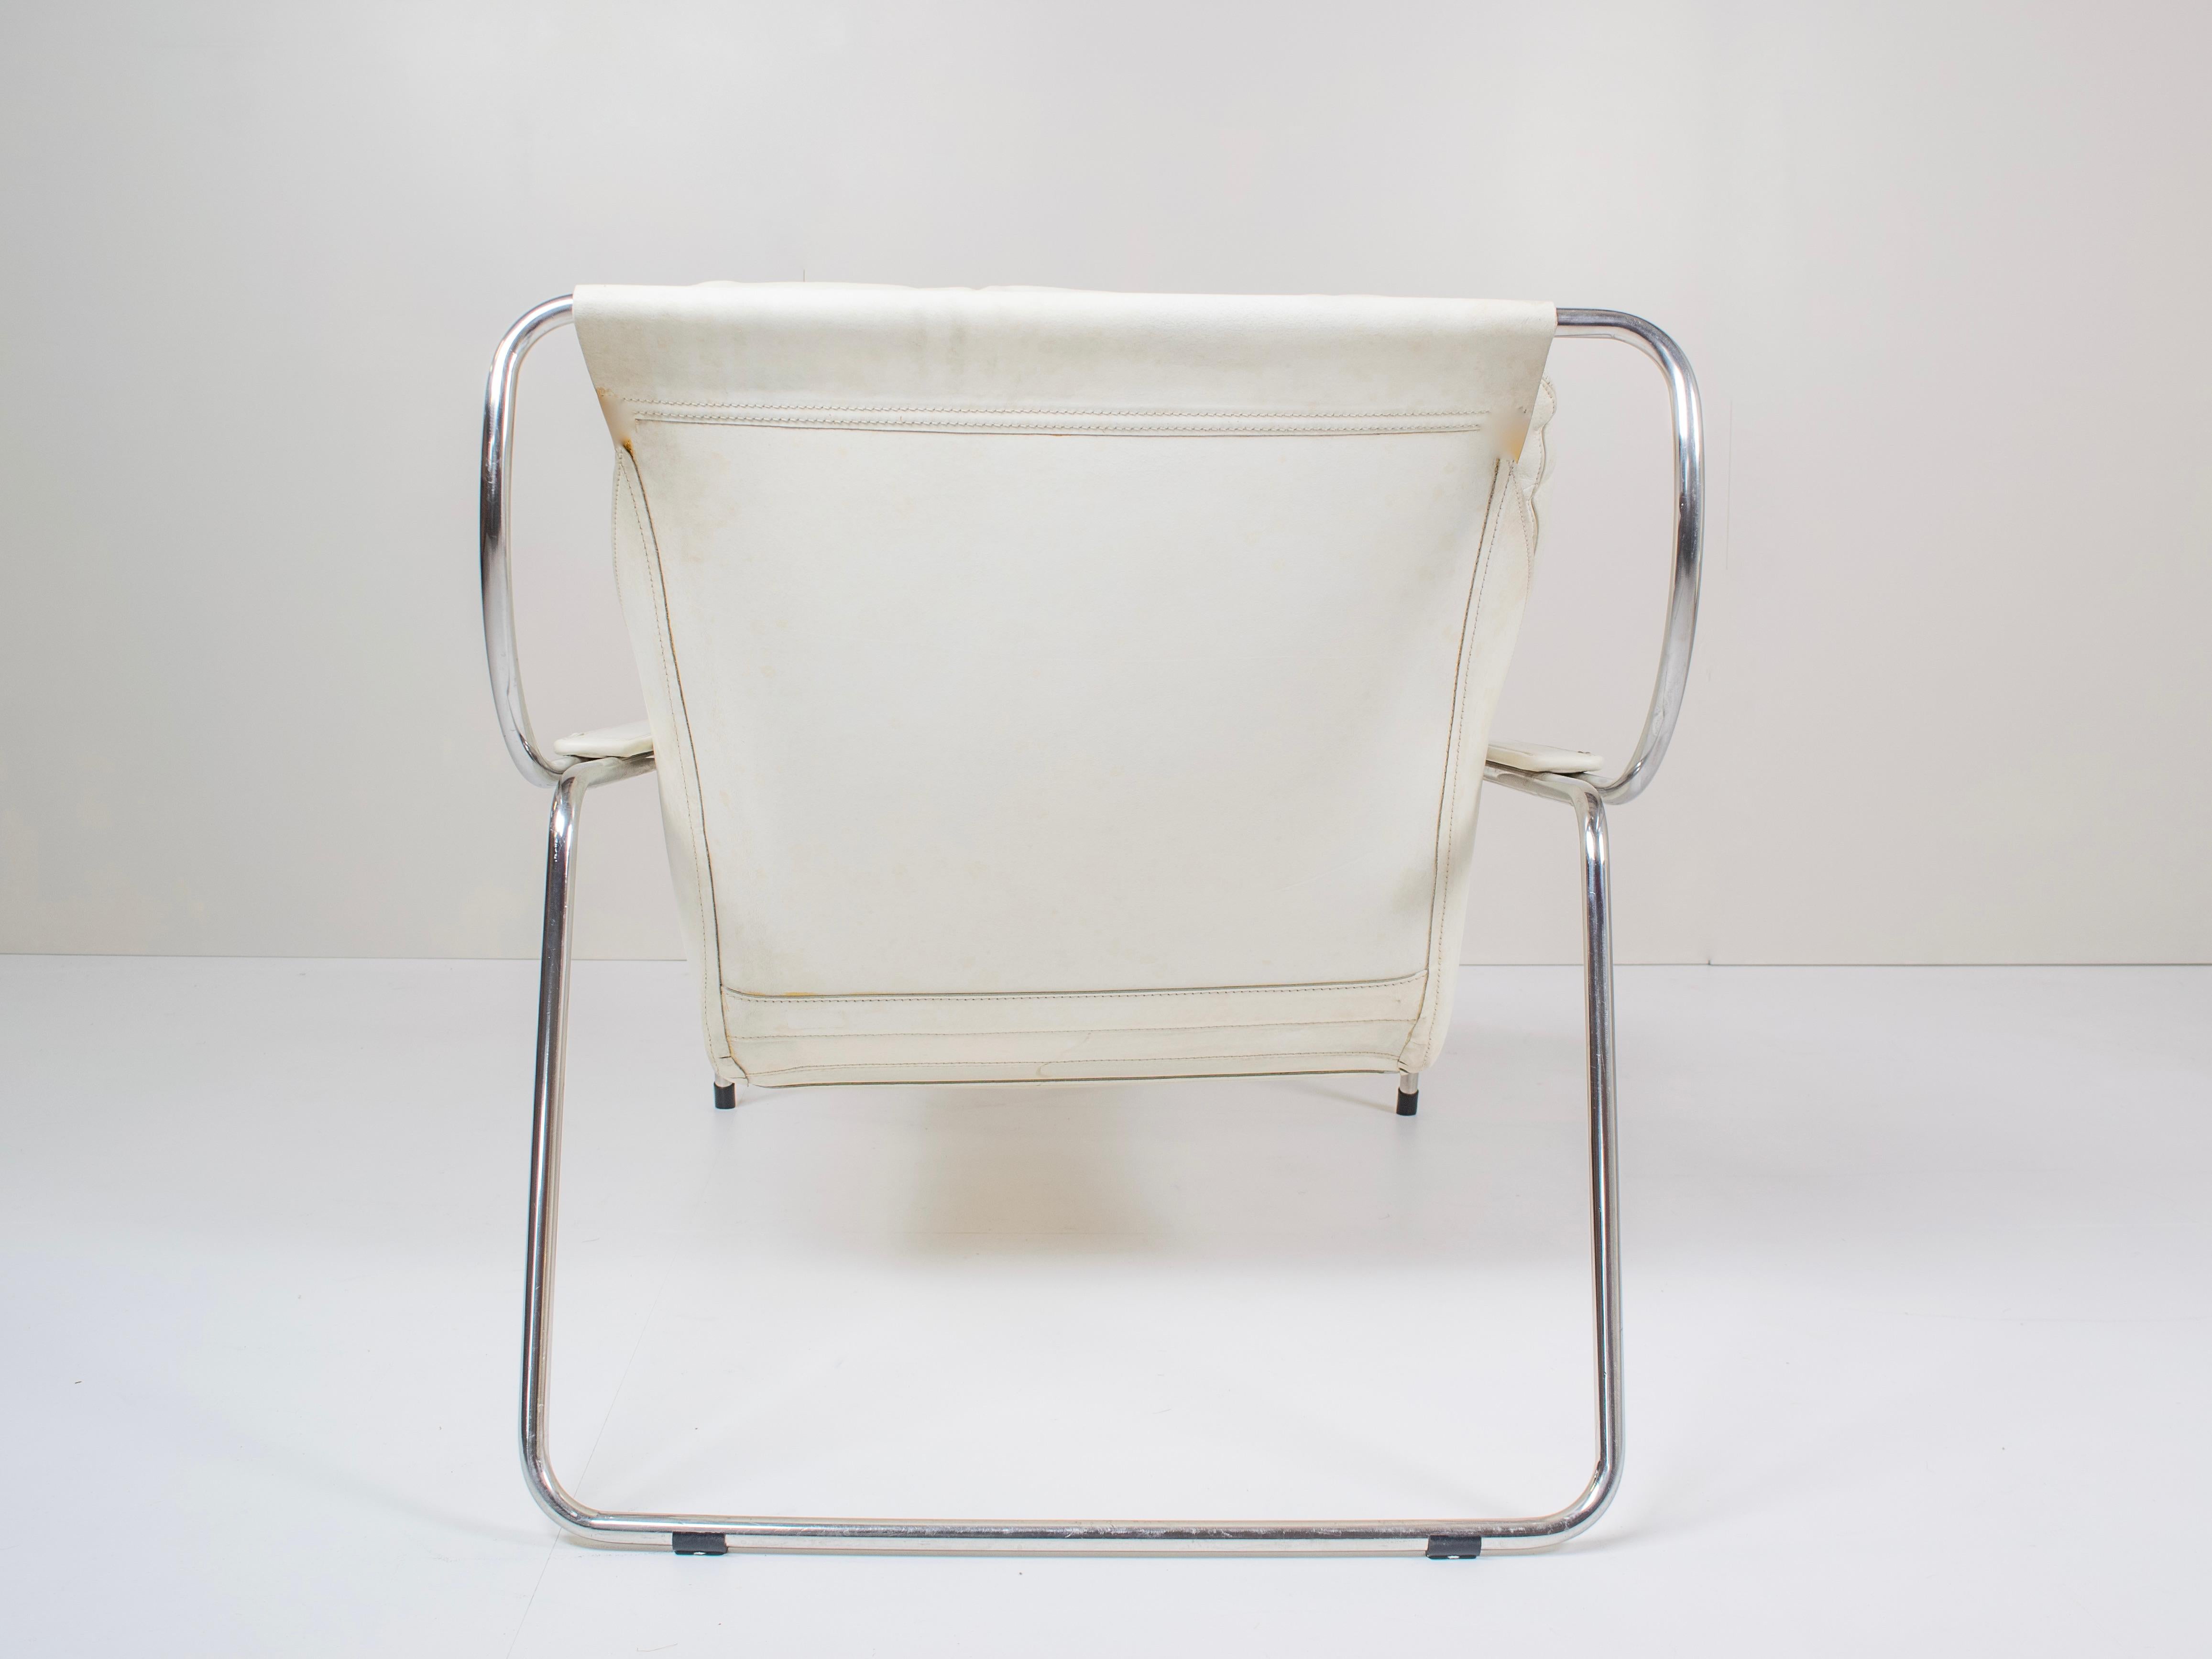 Late 20th Century Pair of Marco Zanuso Maggiolina White Leather Chairs by Zanotta, Italy, 1947